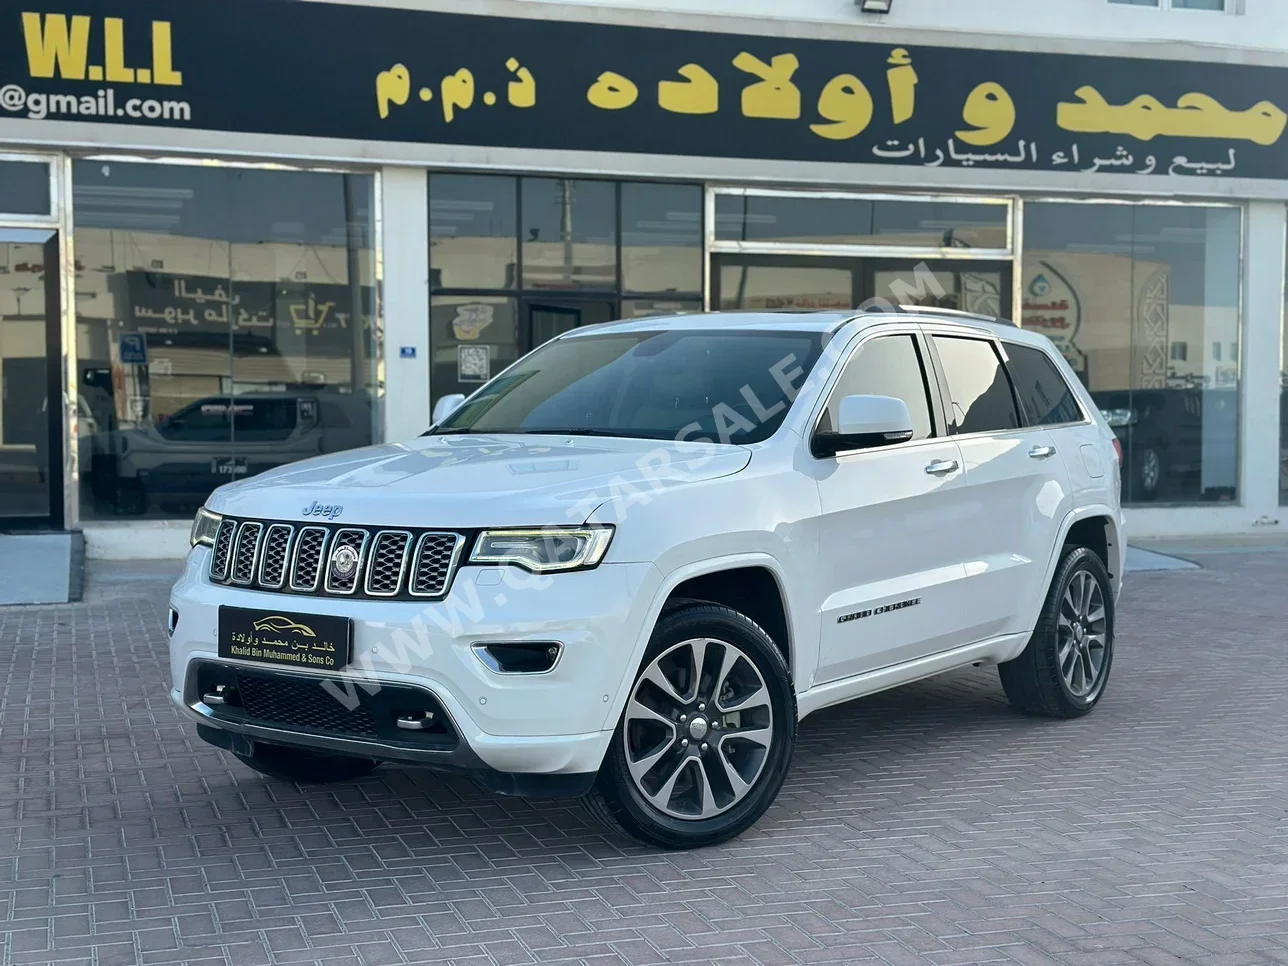 Jeep  Grand Cherokee  2017  Automatic  108,000 Km  6 Cylinder  Four Wheel Drive (4WD)  SUV  White